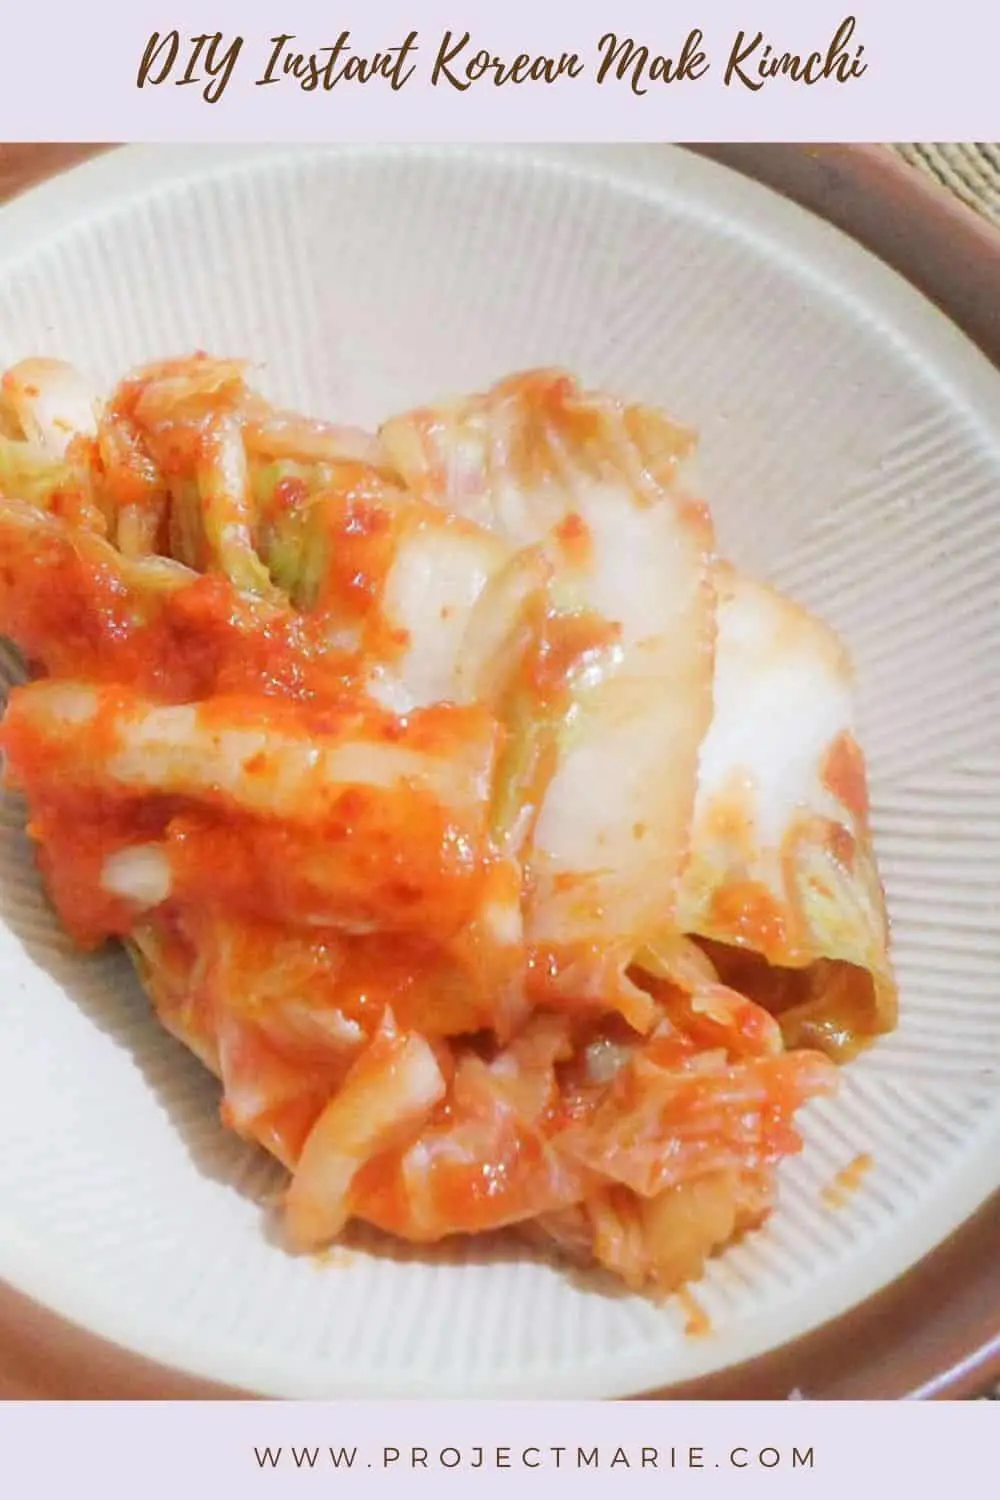 How To Make Instant Mak Kimchi At Home